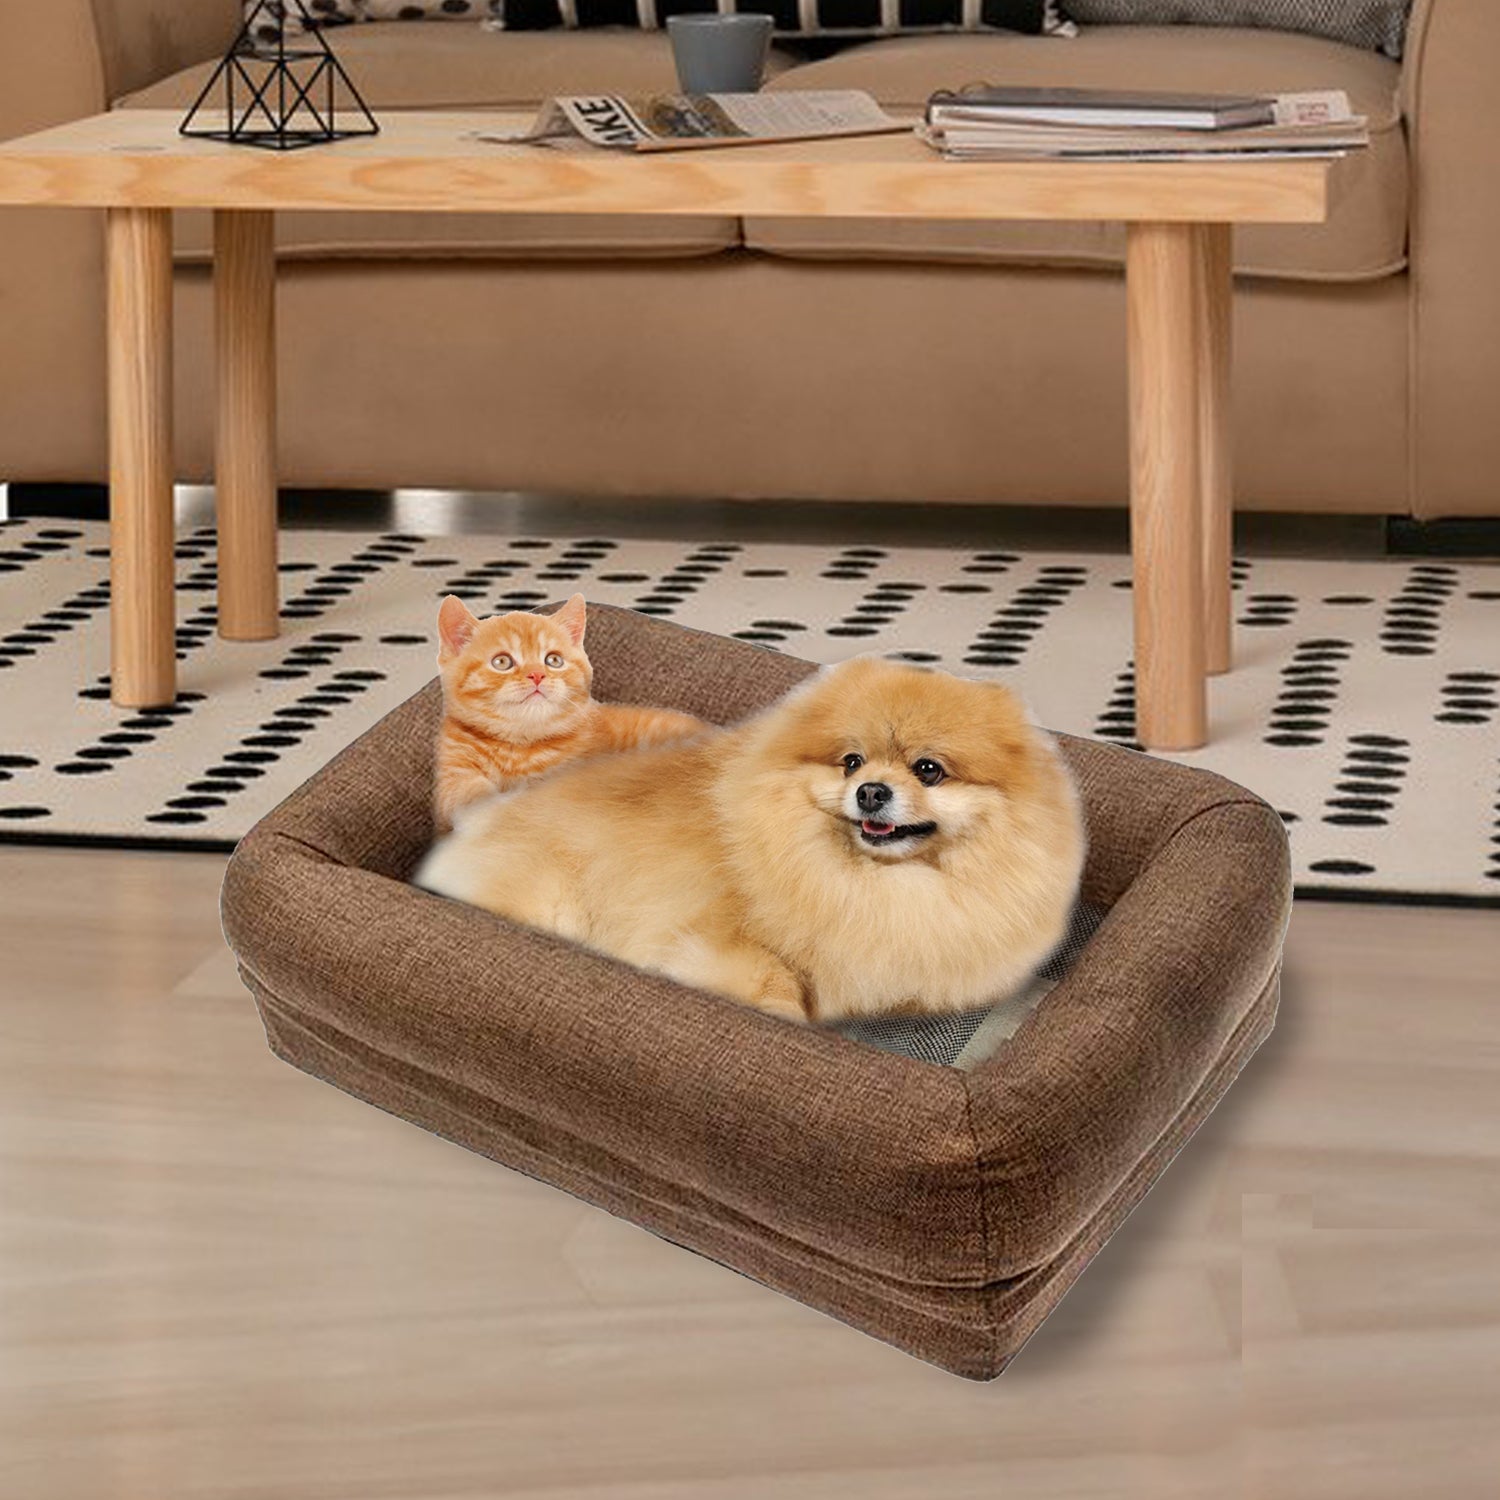 PinkSheep Waterproof Memory Foam Dog Bed Plush Orthopedic Sofa Pet Bed with Removable Cover for Small Medium Sized Cats Dogs